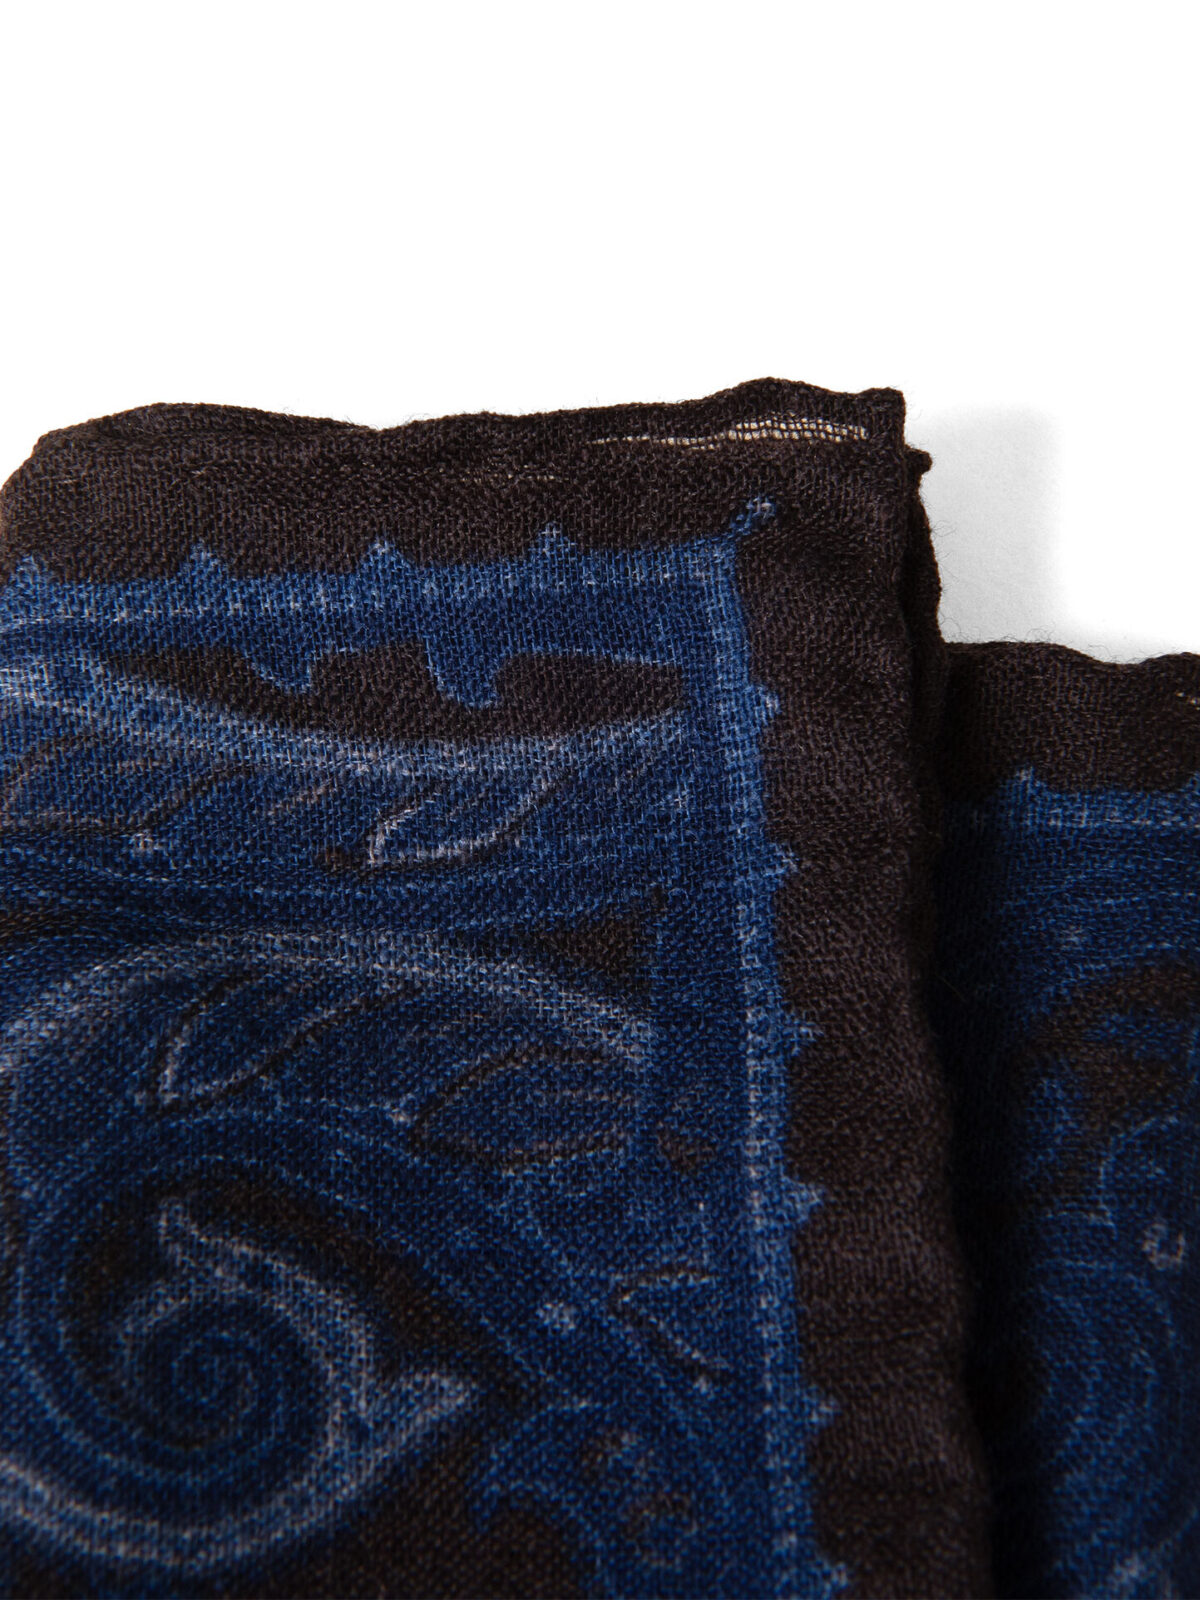 Navy and Brown Paisley Gauze Wool Pocket Square